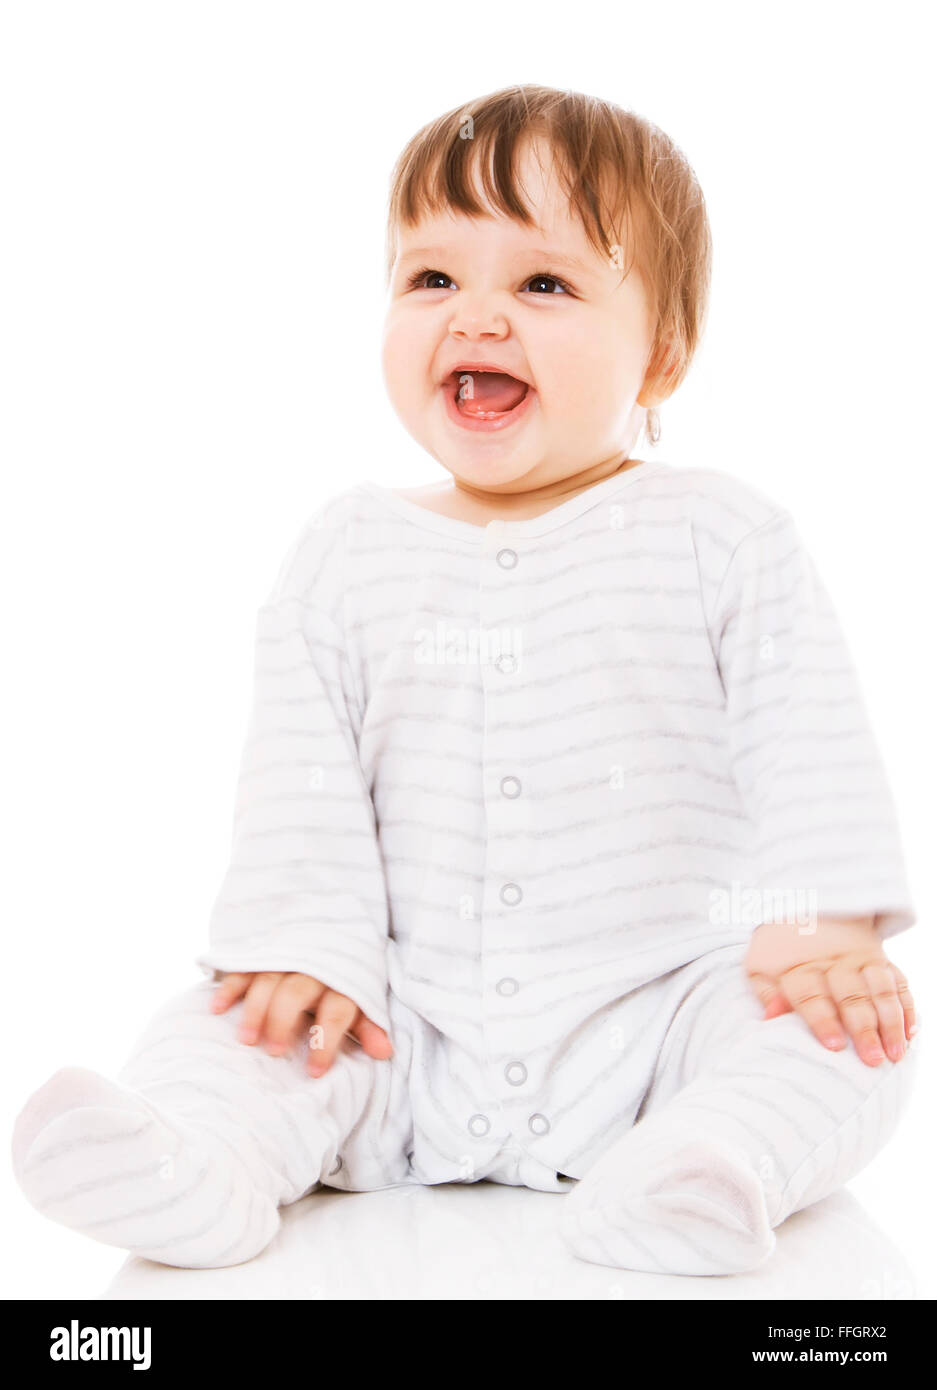 Cute baby sitting on the white floor background, wearing a sliders and smiling big. Isolated. Stock Photo